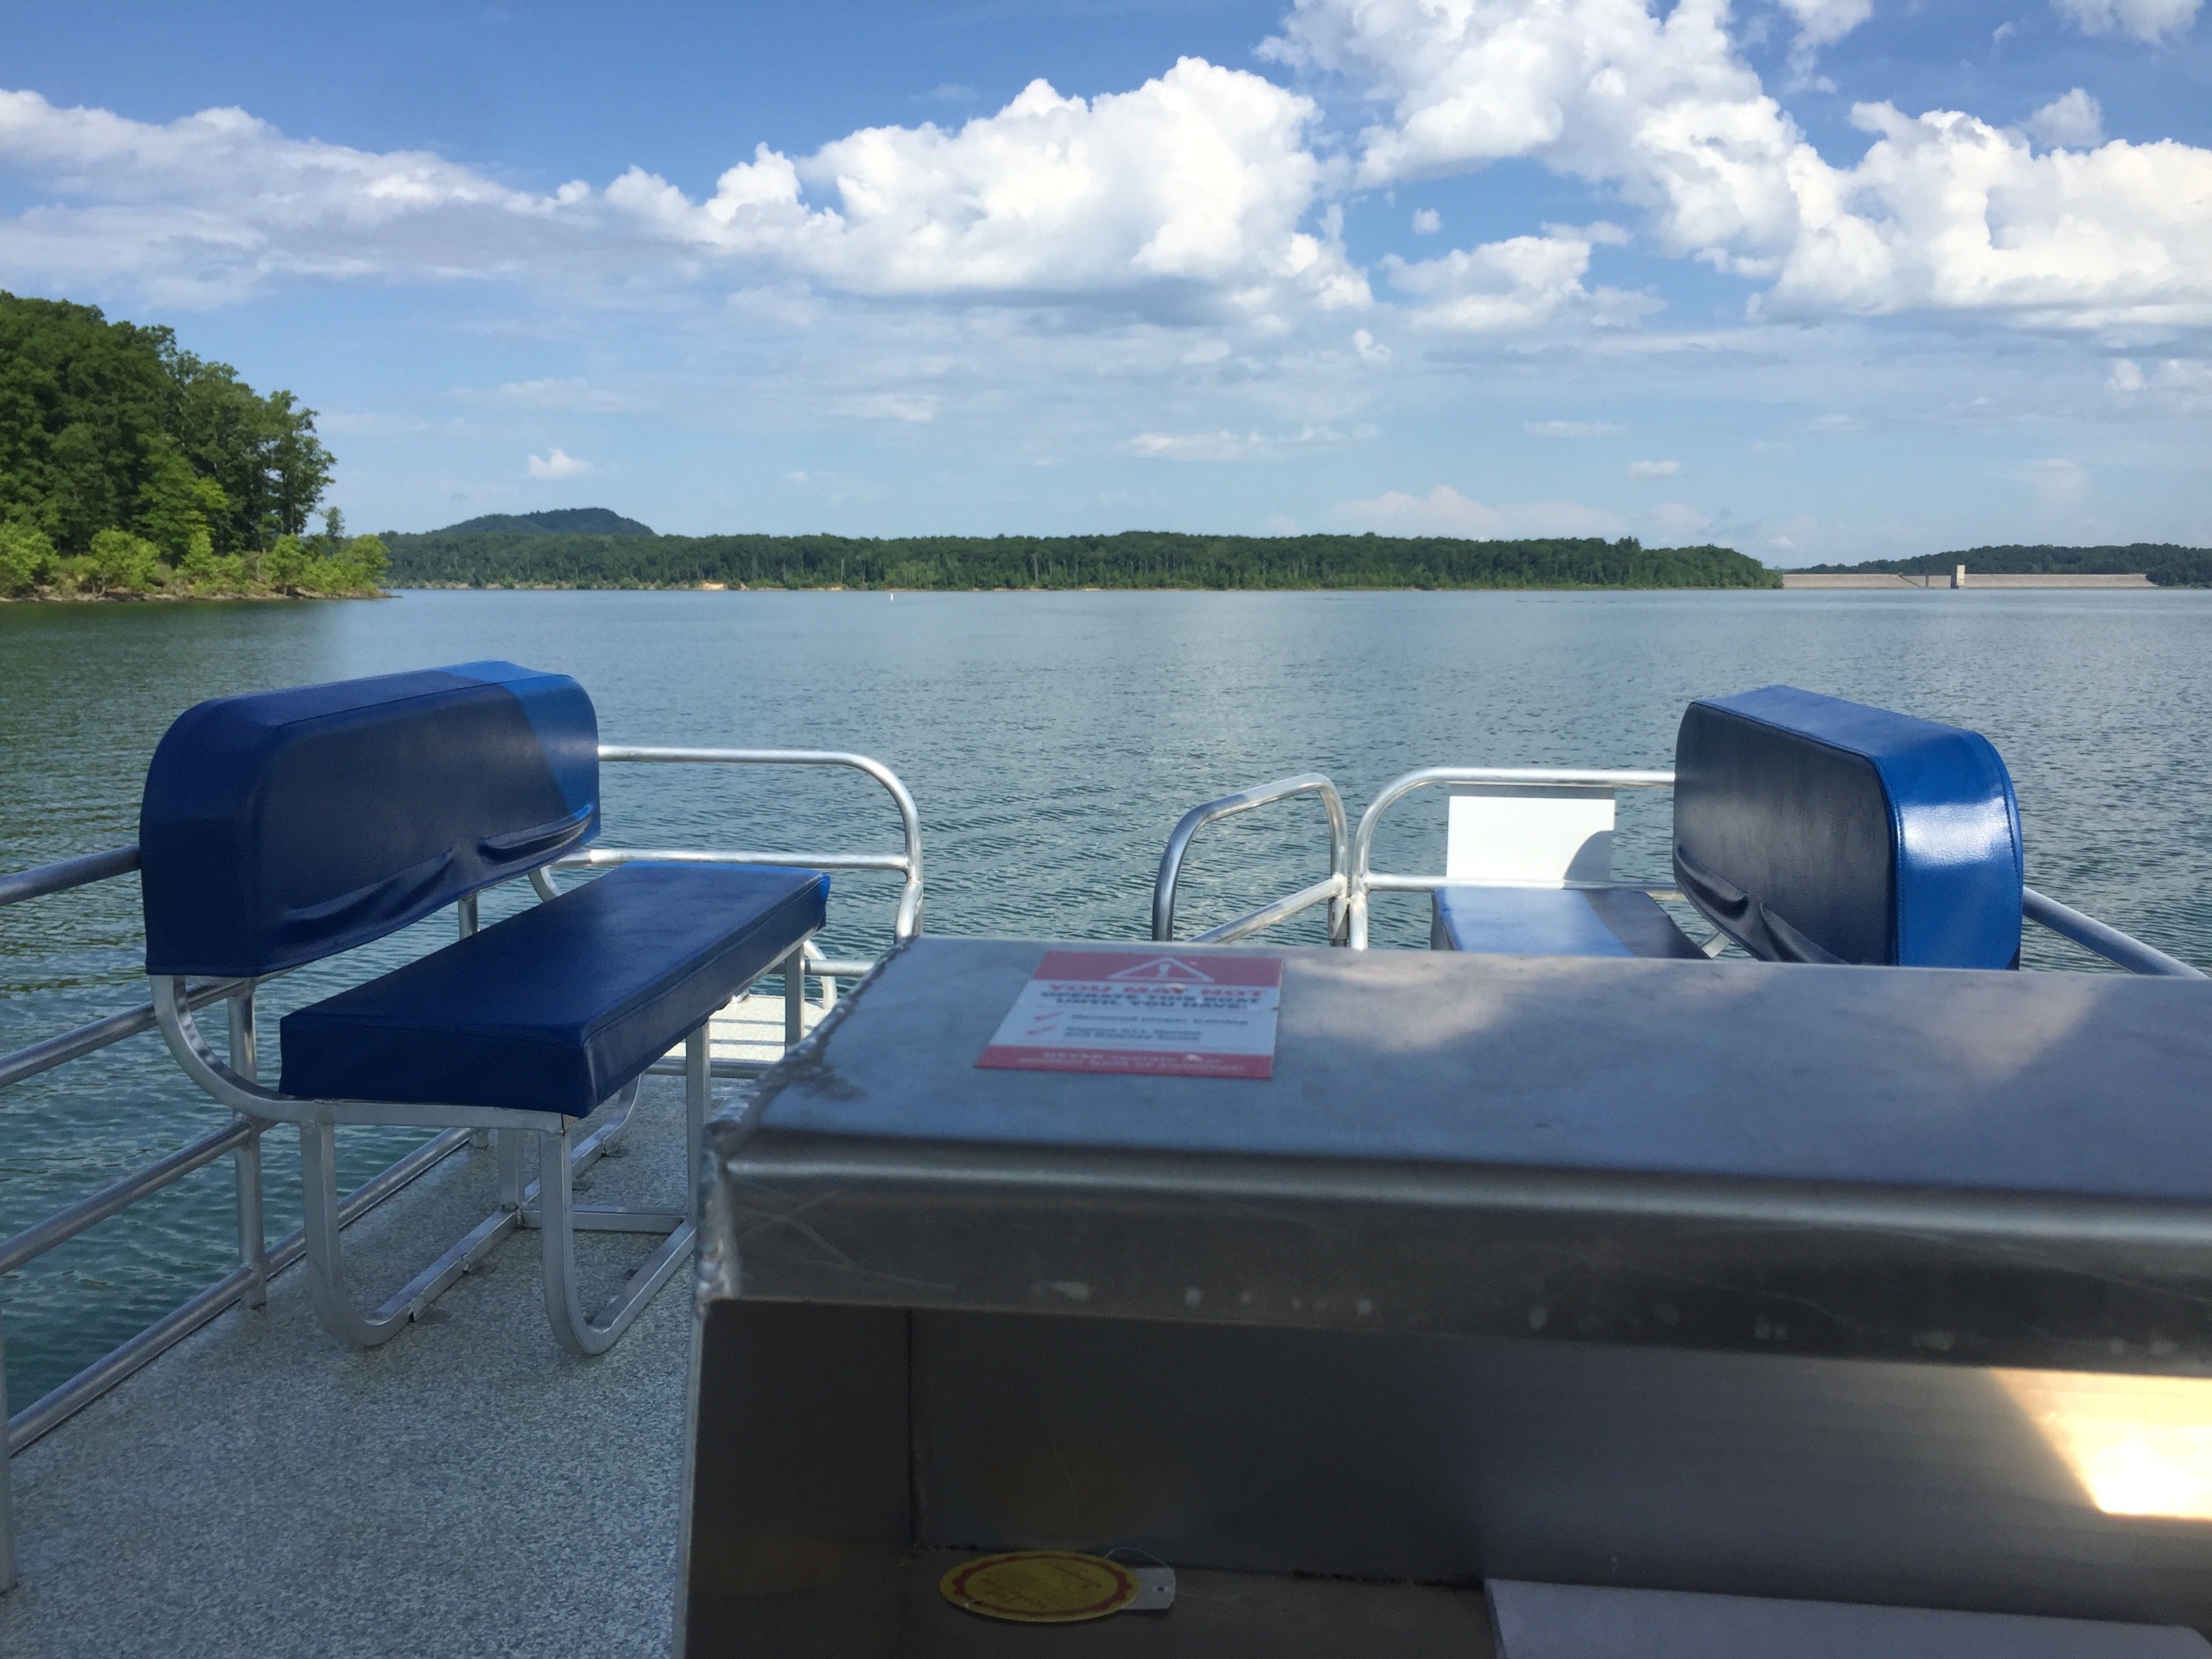 Rented a pontoon boat for the day to explore Cave Run Lake. Highly recommended!